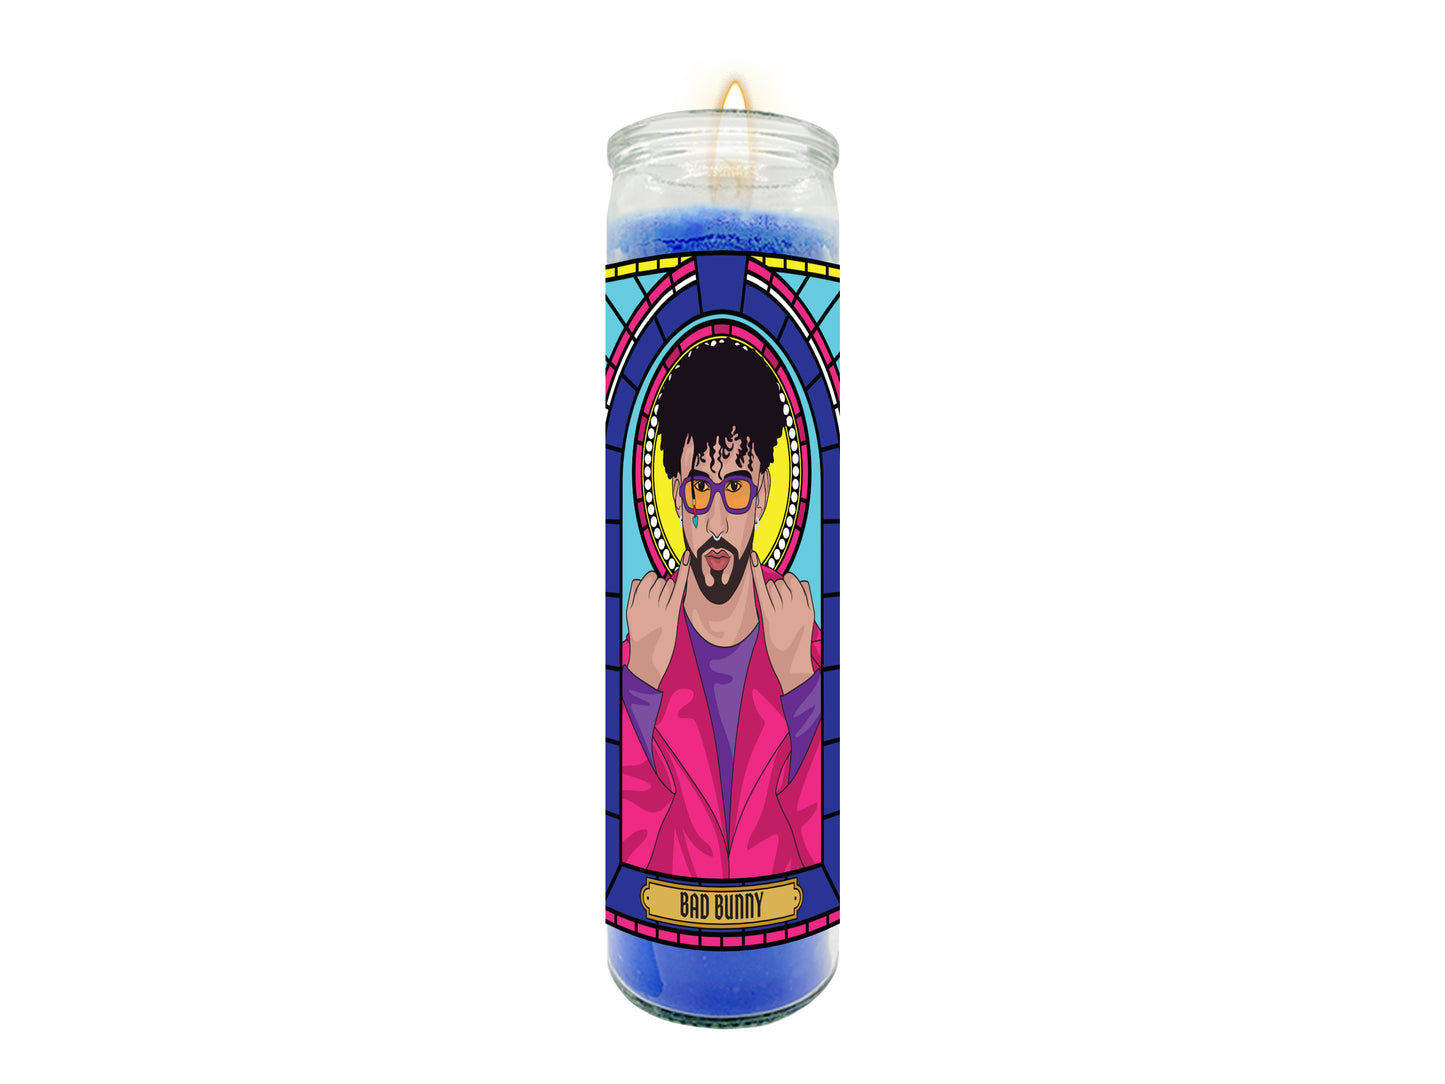 Bad Bunny Illustrated Prayer Candle